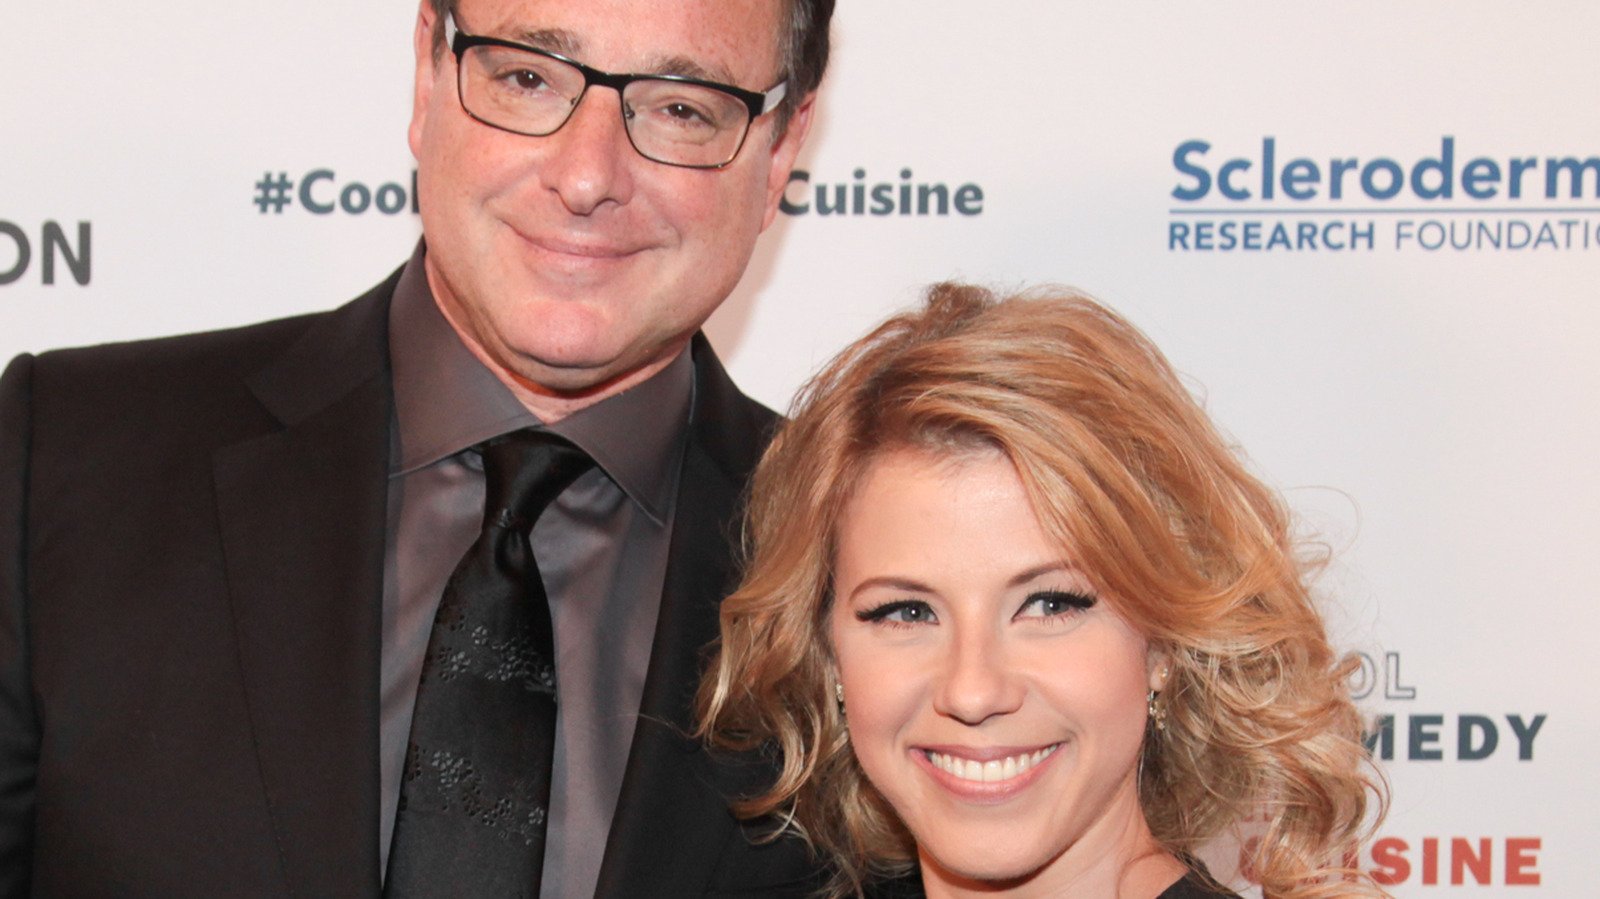 Jodie Sweetin's Raw Tribute To Bob Saget Has Fans In Tears - The List